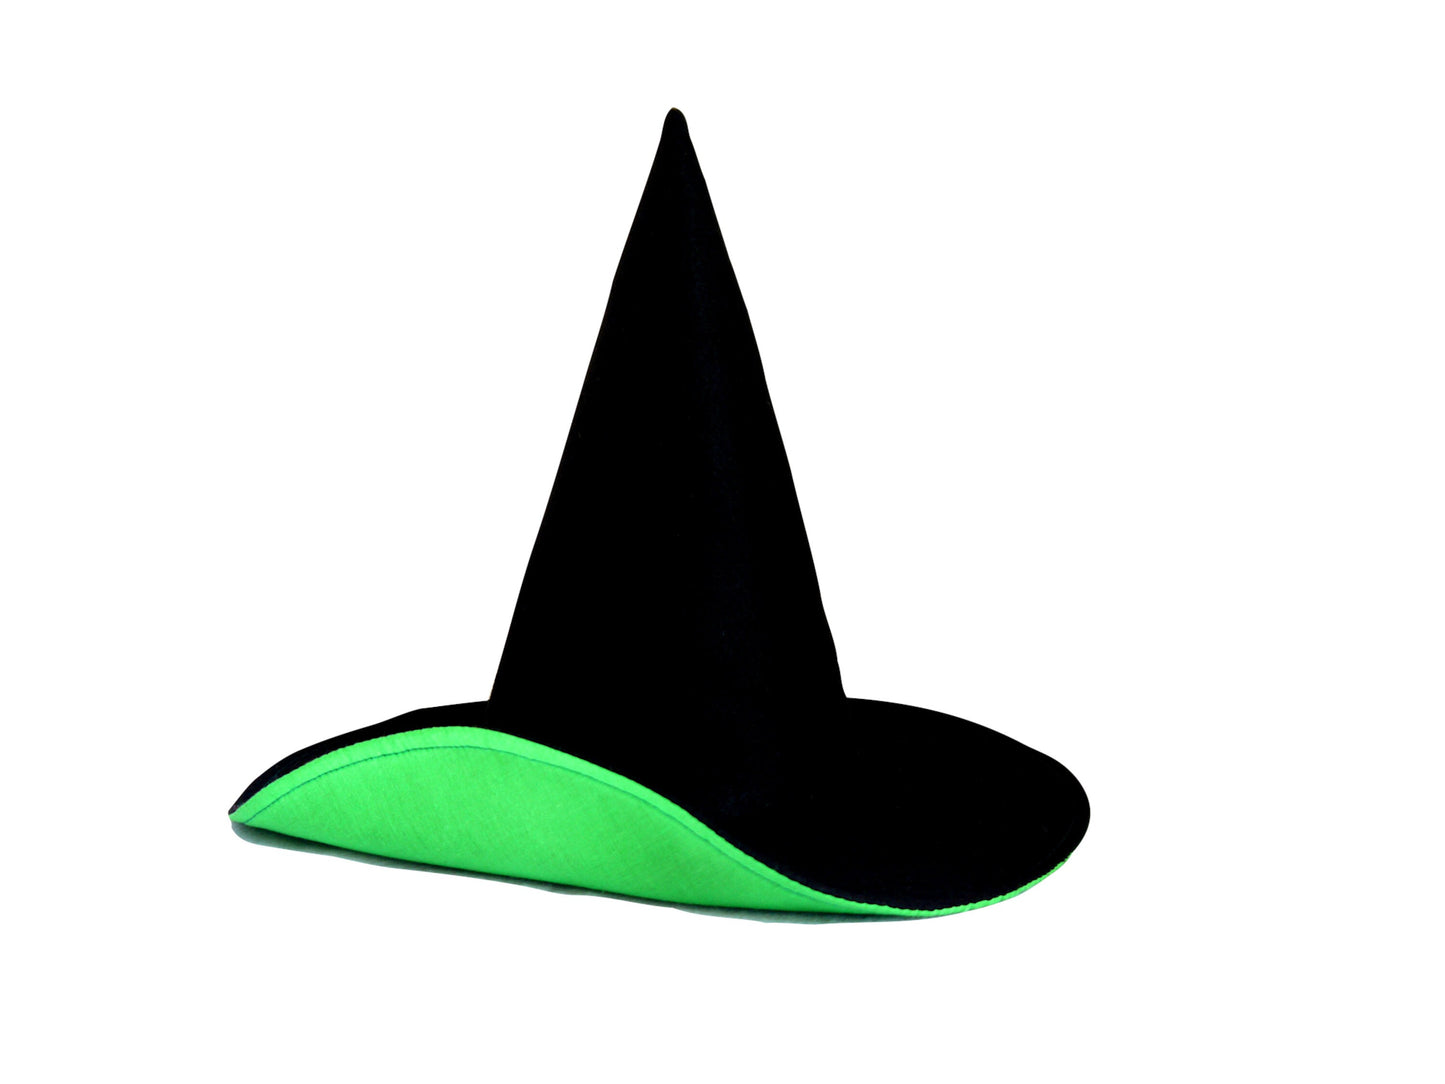 Witch hat reversible wizard hat costume boys girls adults children’s costume book Day